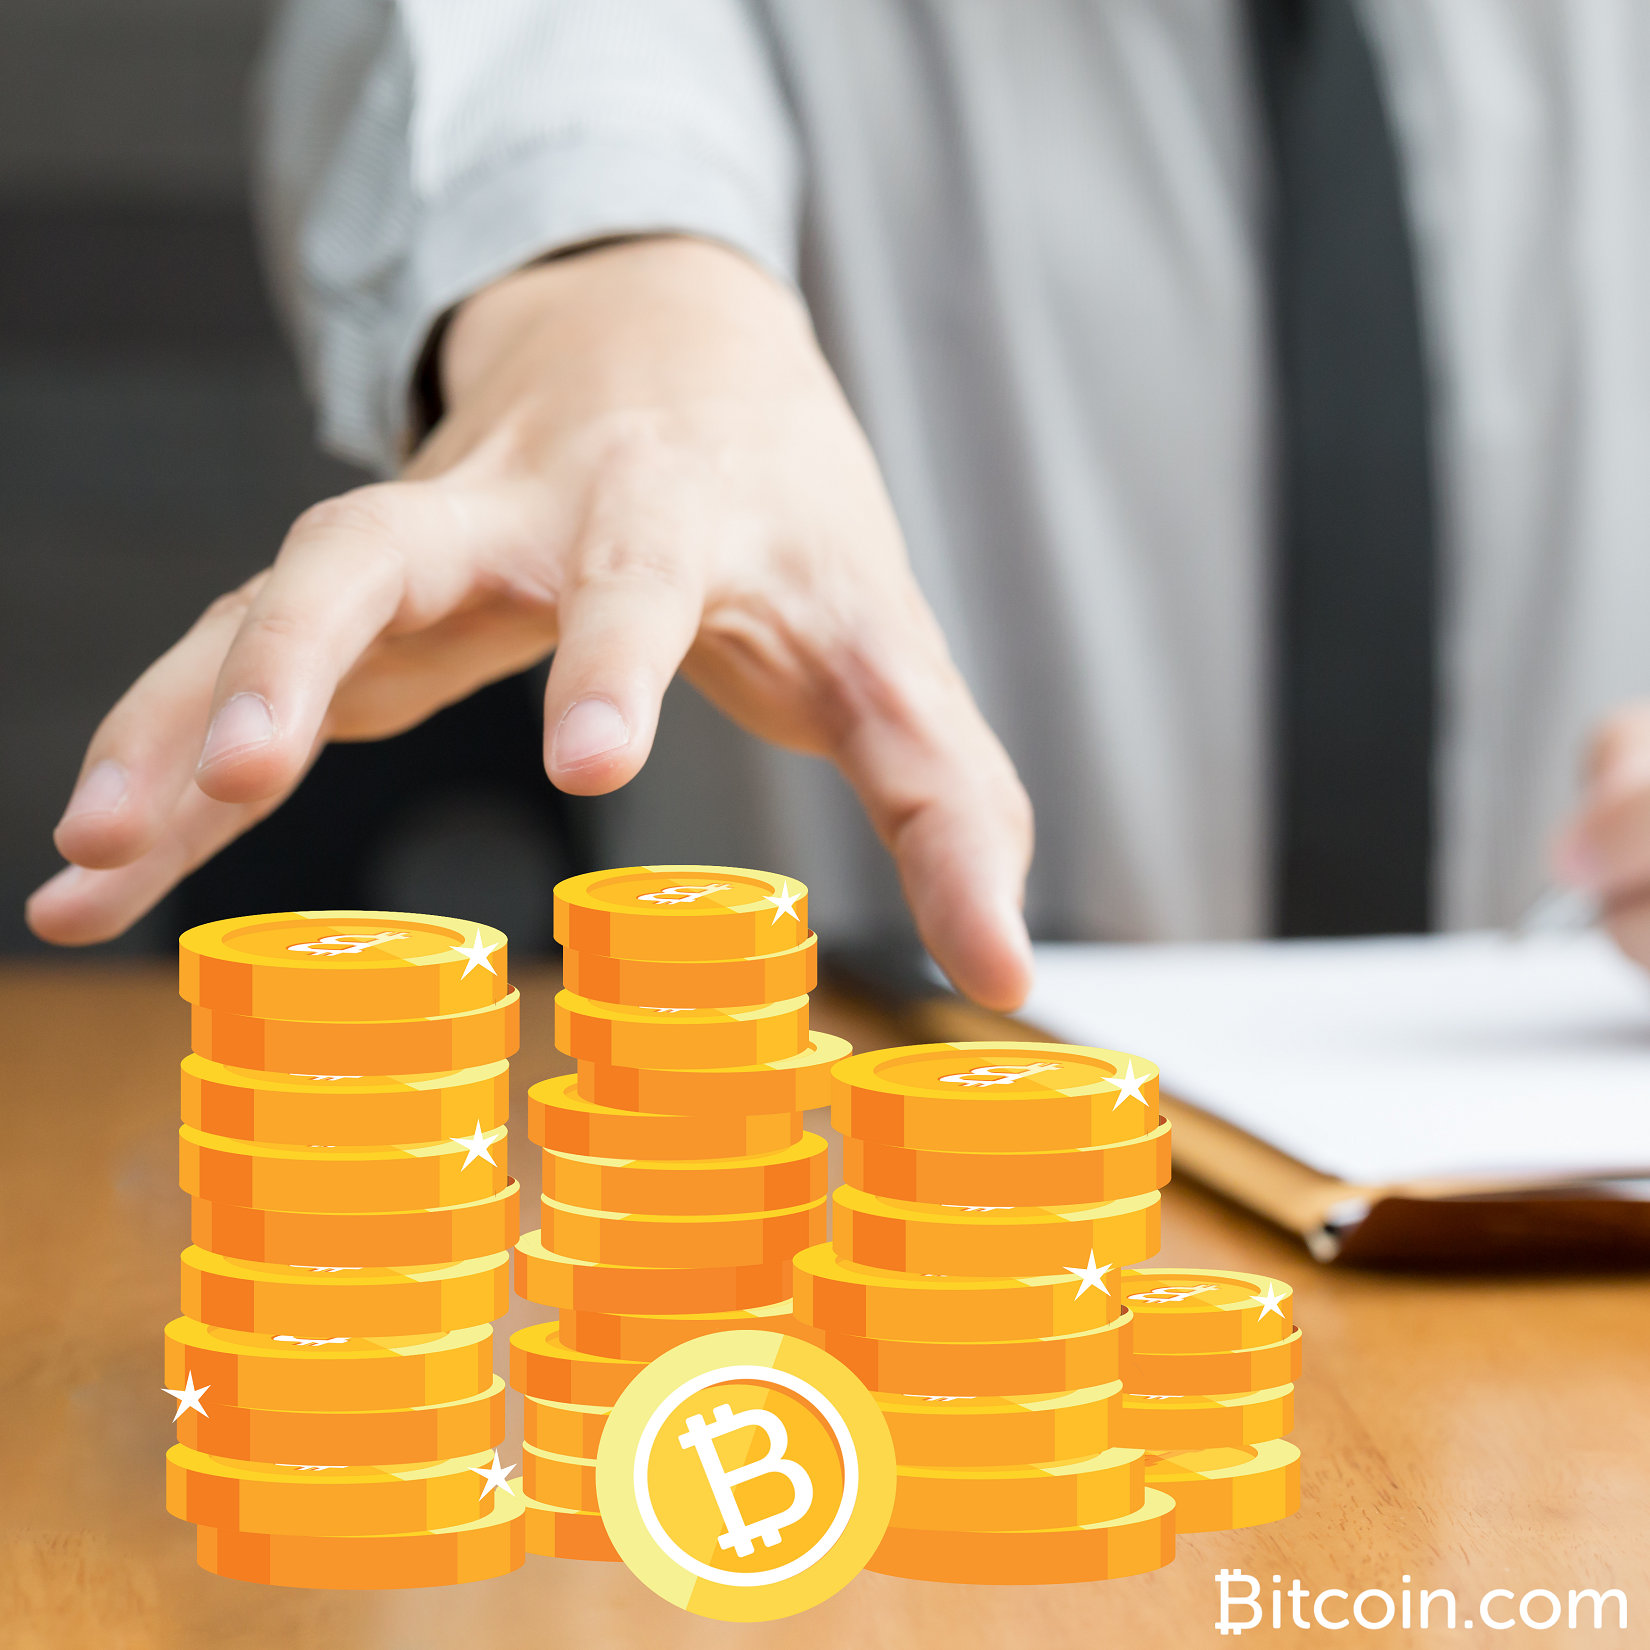 South Korean Prosecutor Fights to Confiscate Bitcoins from Criminal Proceeds